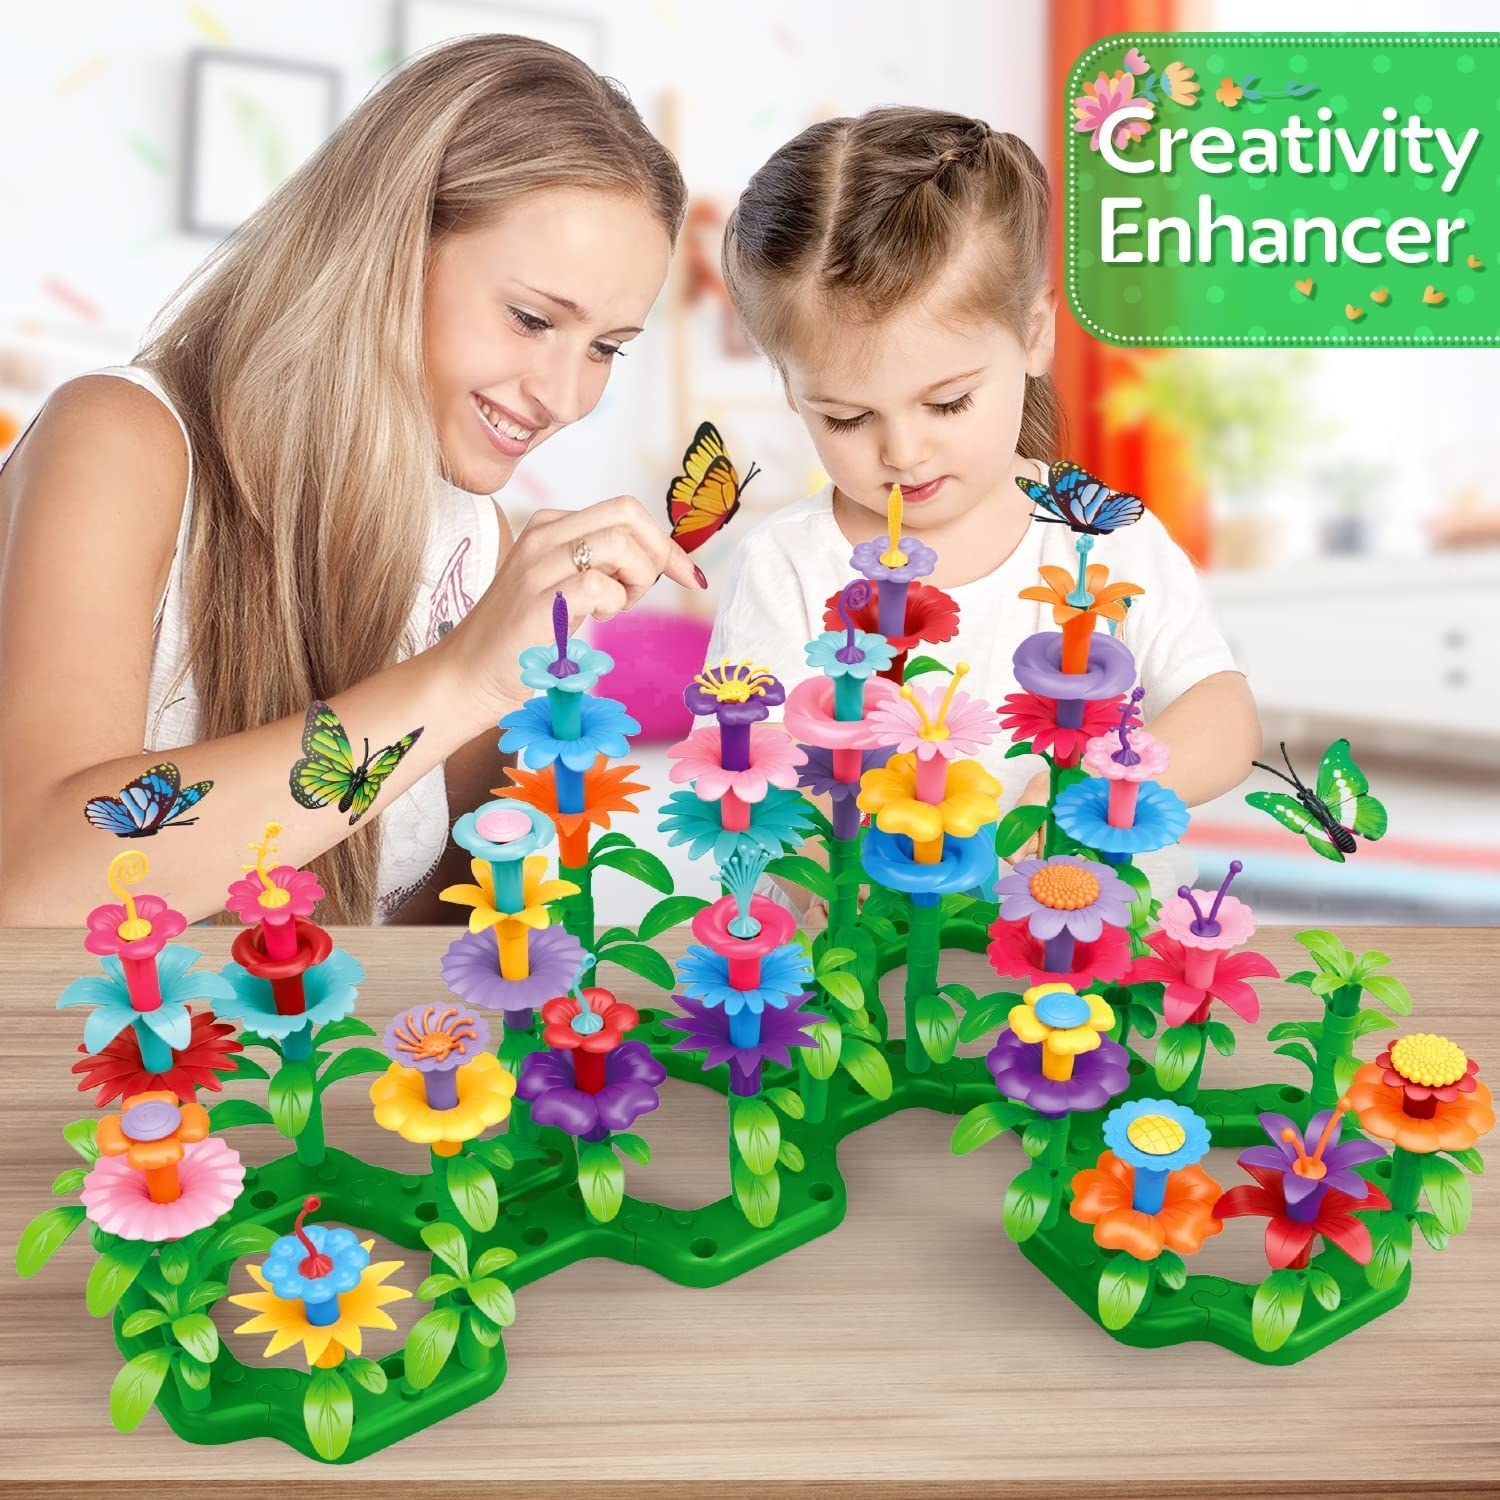 Adult and child model playing with colorful plastic flower toys